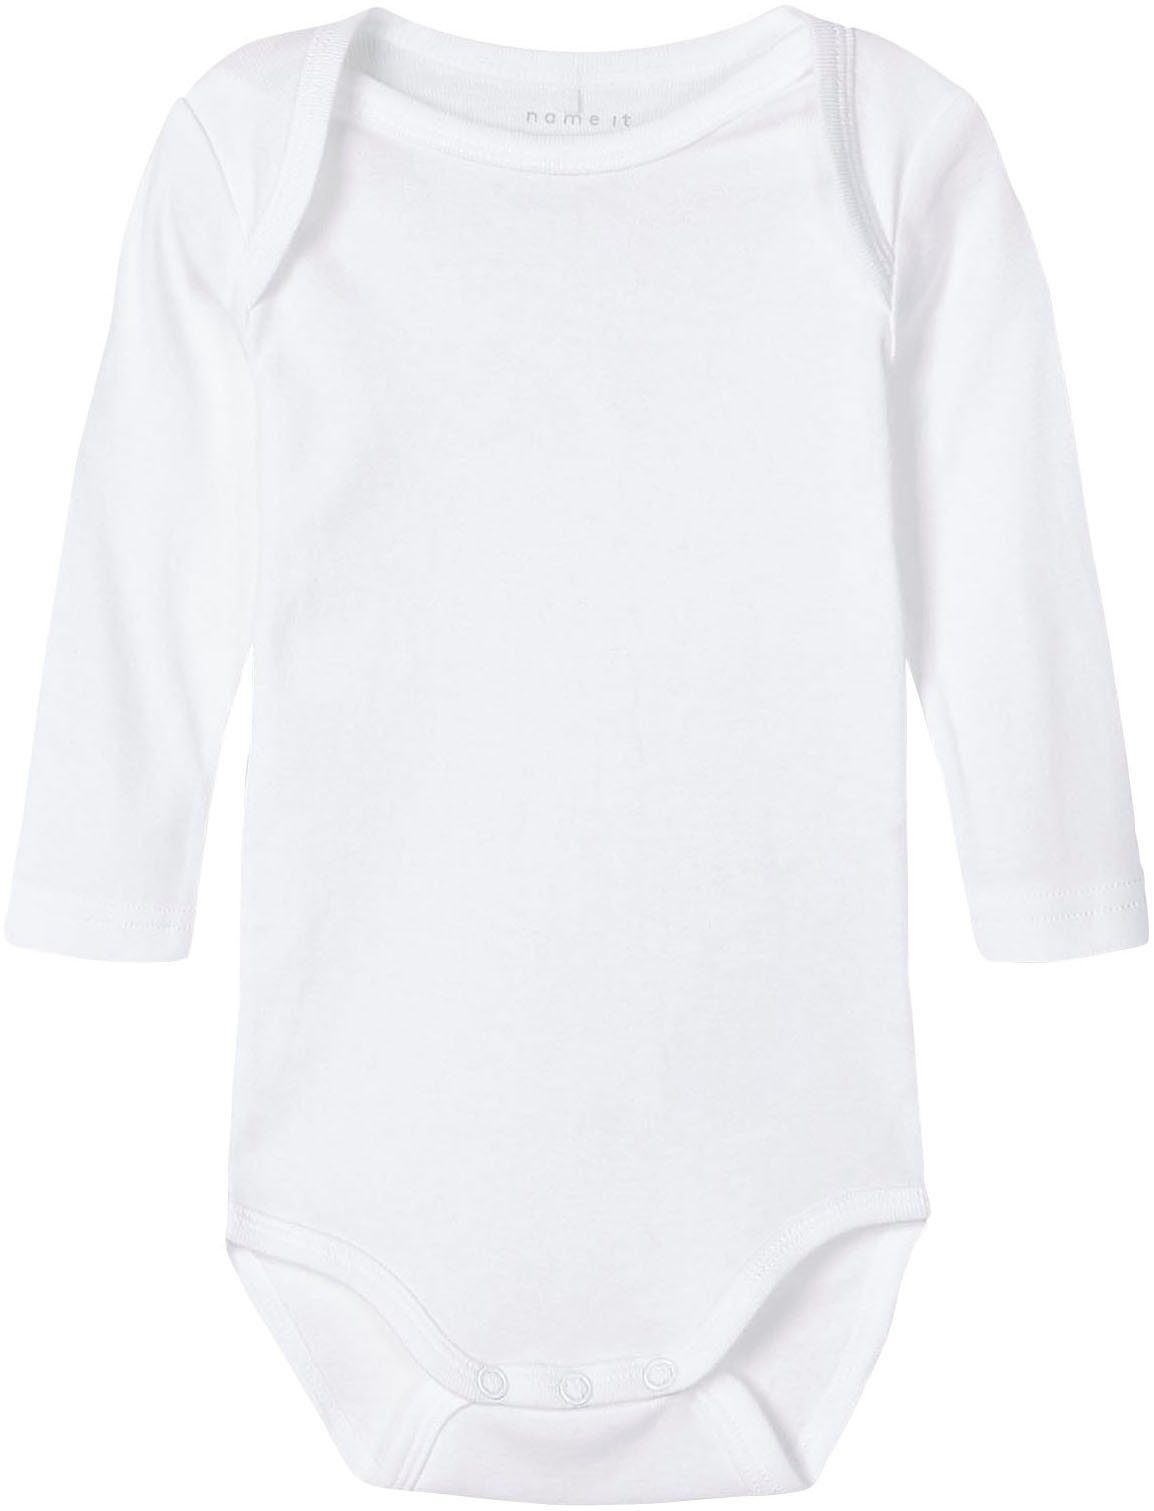 NBNBODY 3P LS NOOS SOLID 3 WHITE It Langarmbody Name 3-tlg) (Packung,